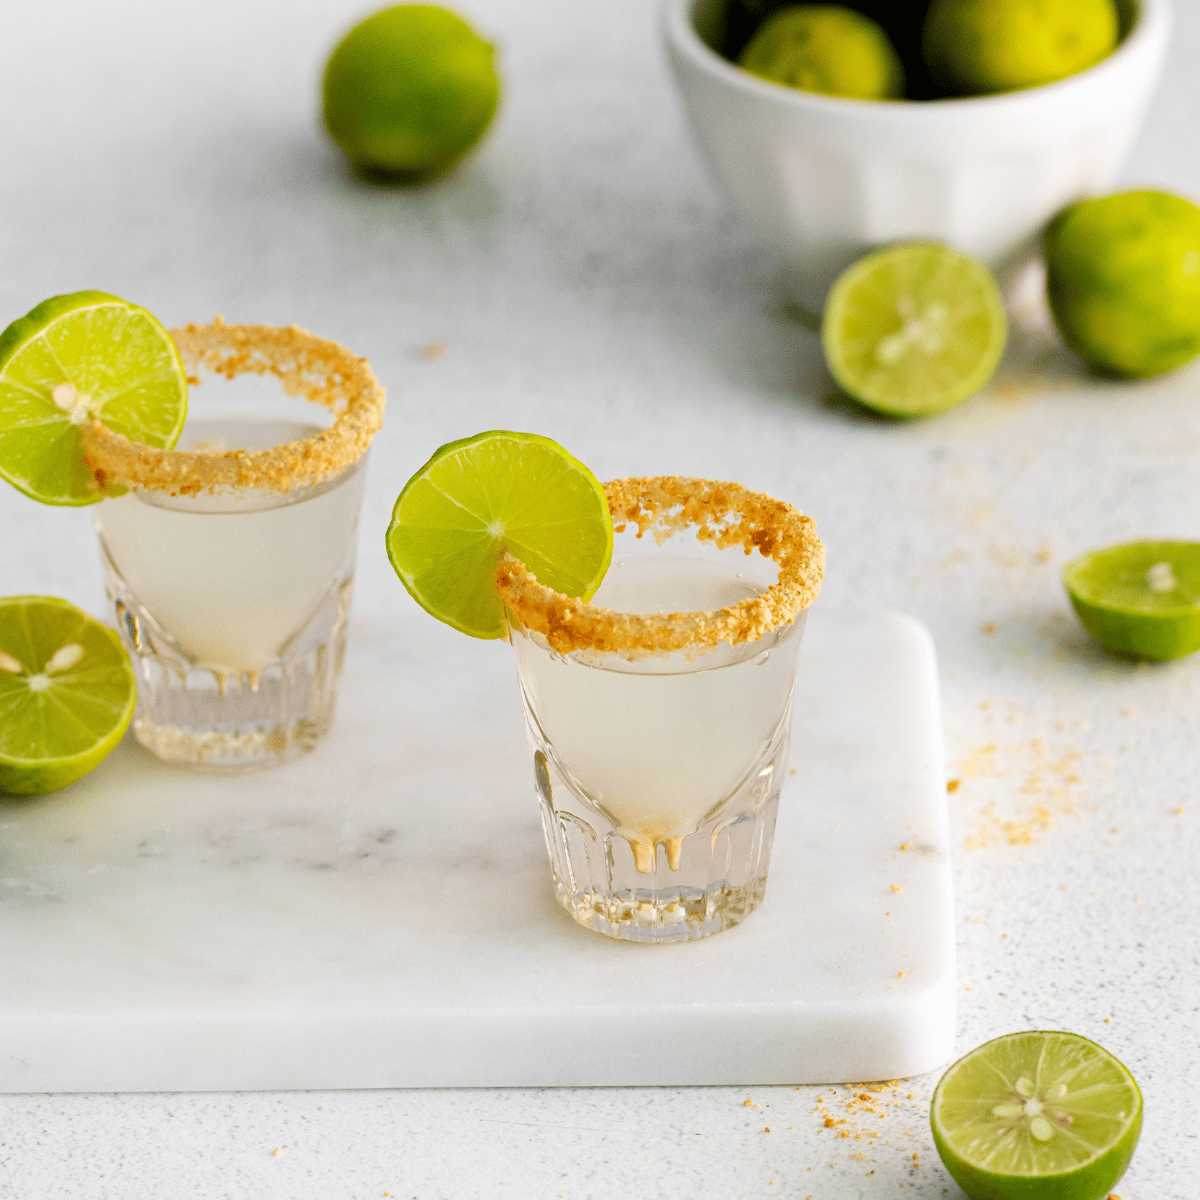 clear shot glass with a milky white clear liquid. Brown crumbled graphams on rim of shot glass. Lime wheel on top side of glass. Limes in backaground